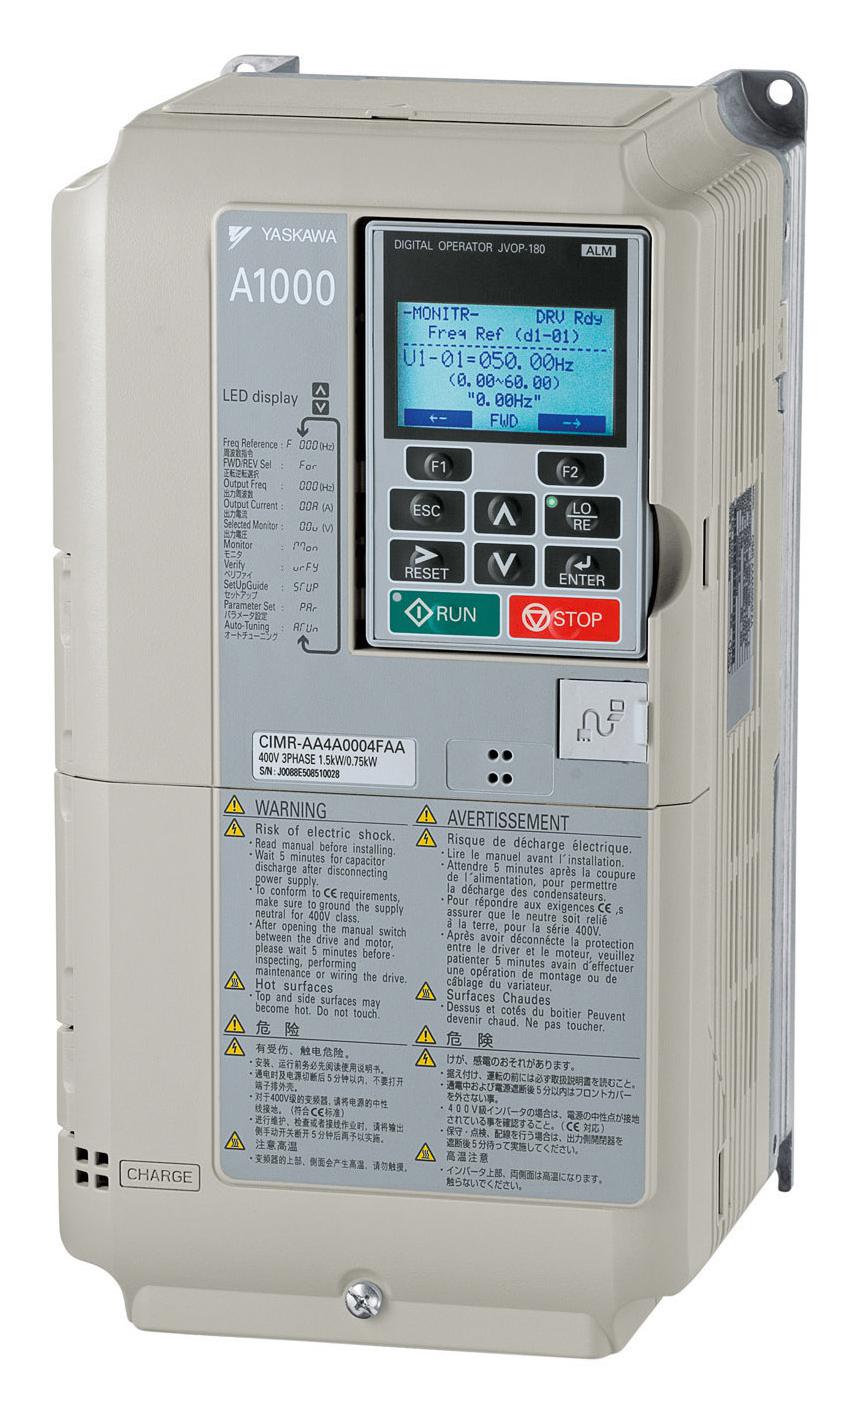 CIMR-AC4A0072AAA AC MOTOR SPEED CONTROLLERS OMRON